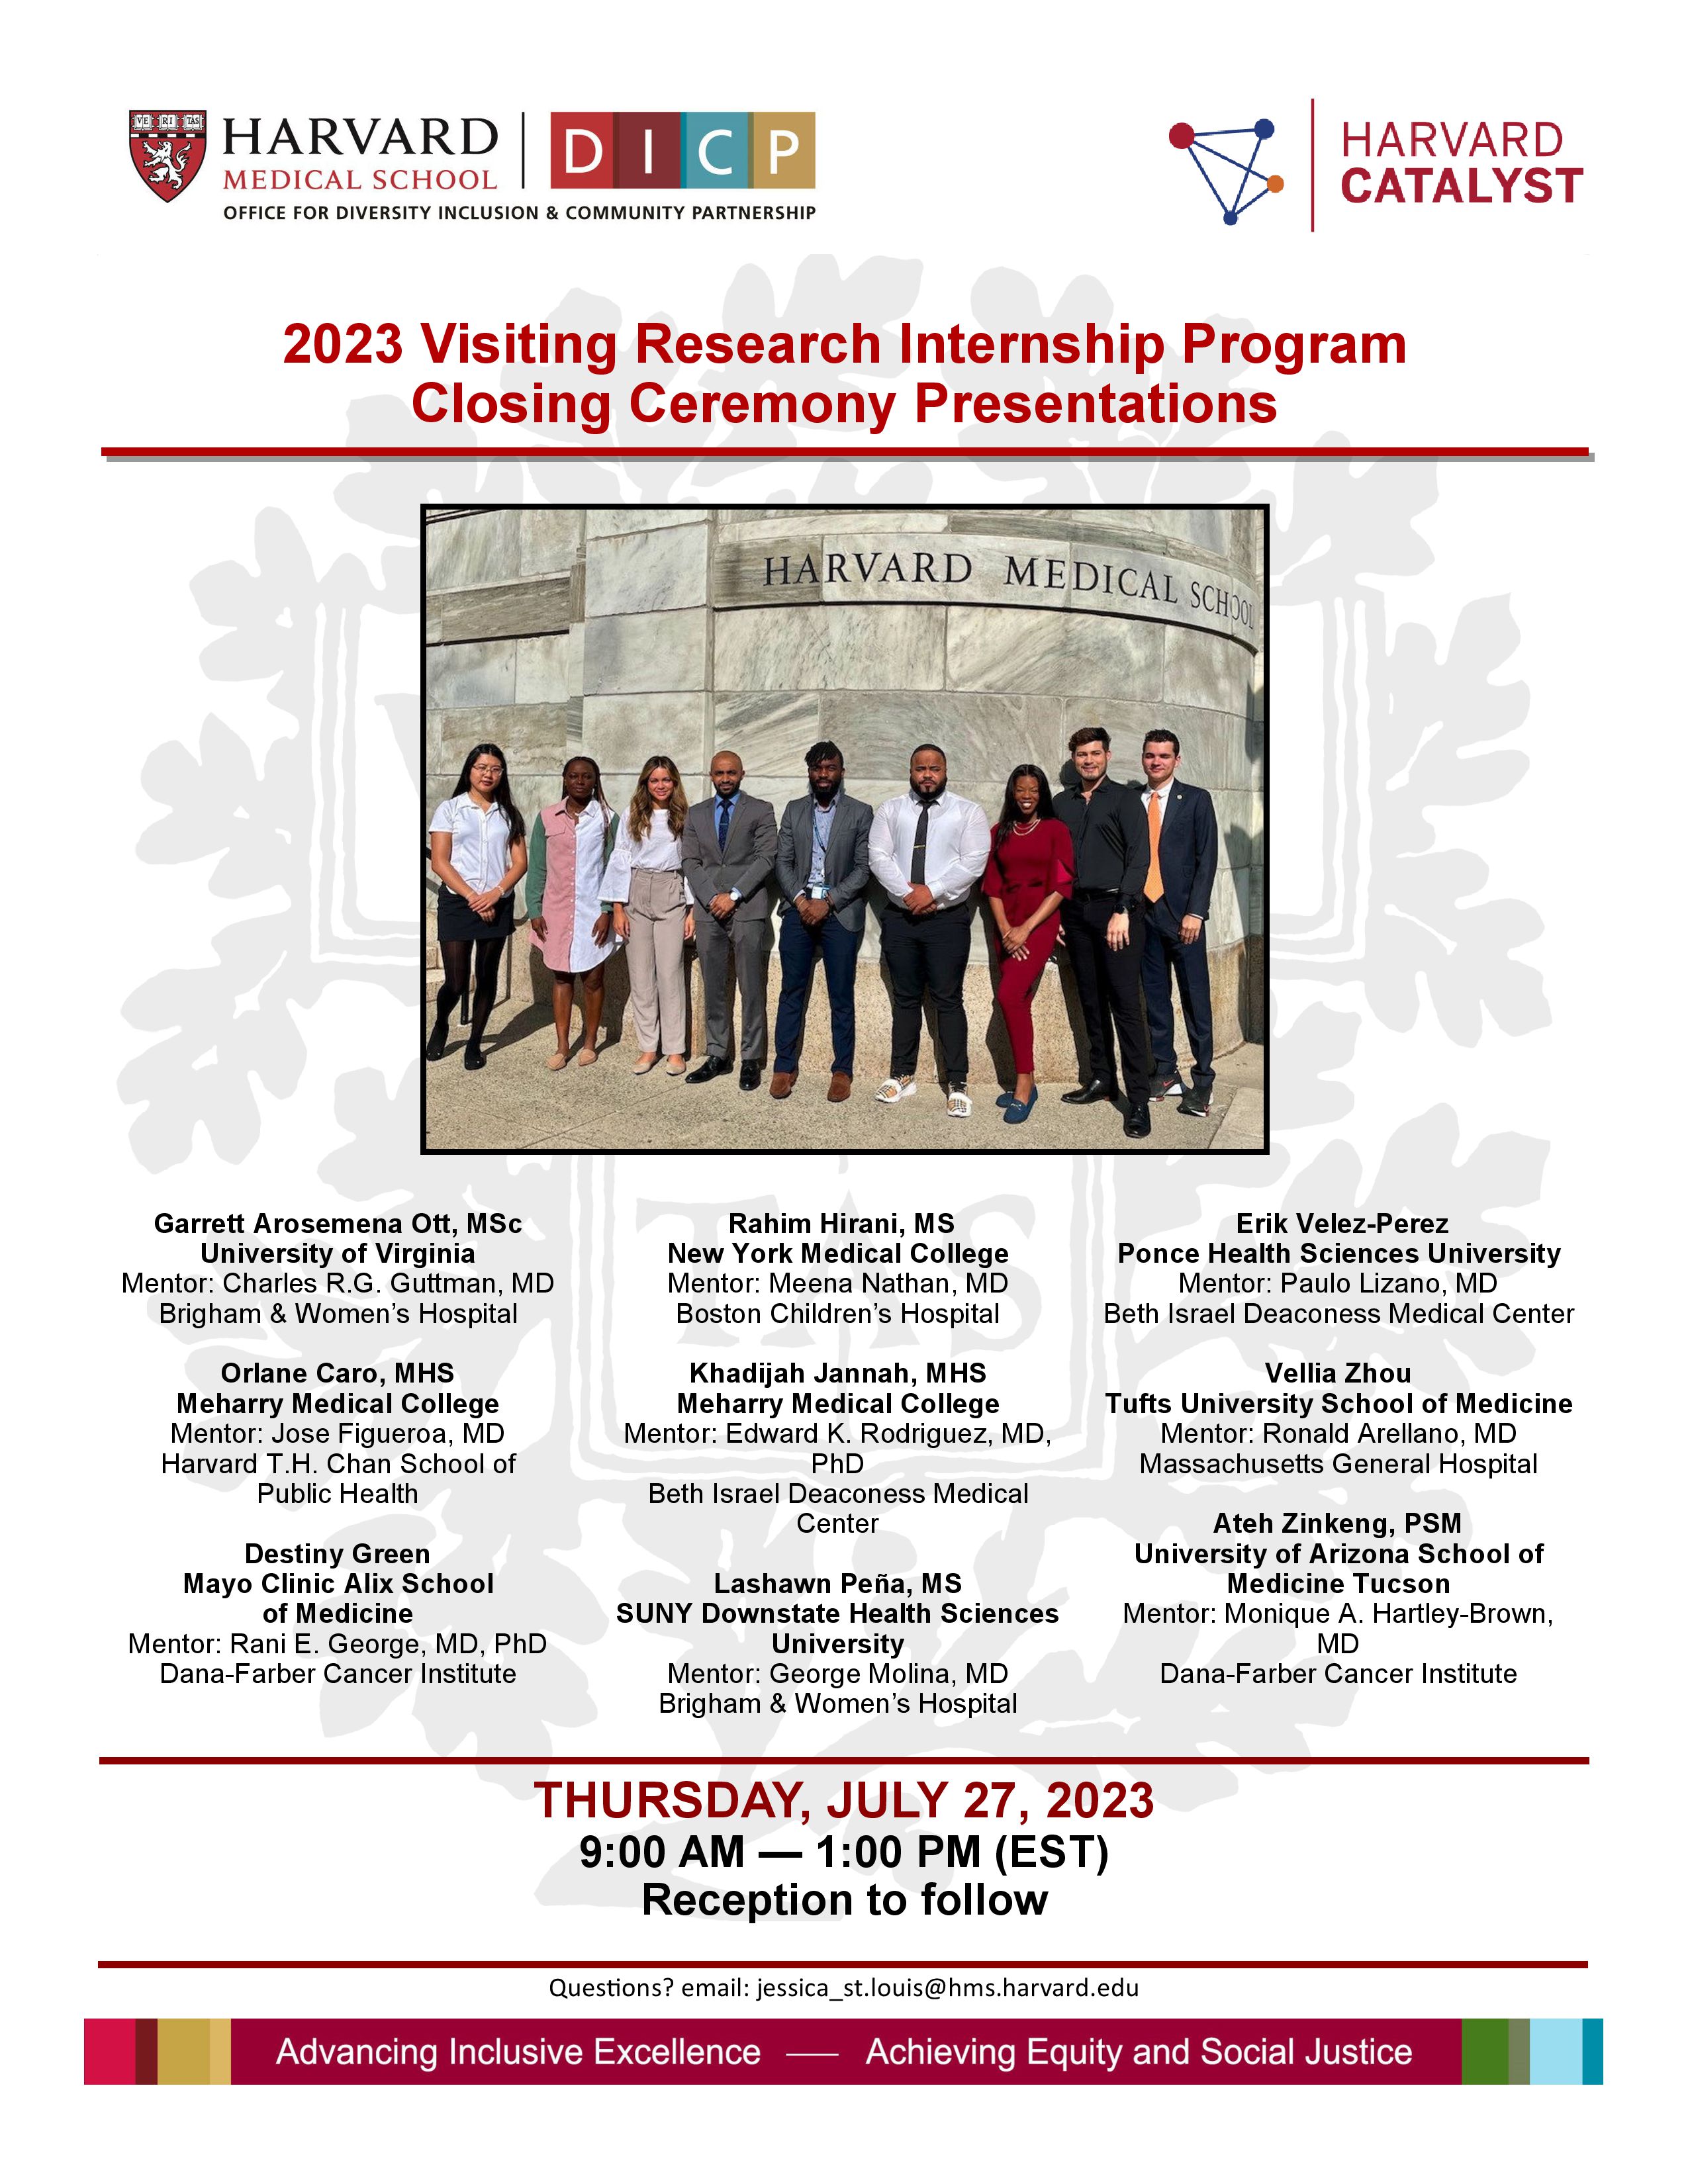 A flyer for the 2021 Visiting Research Internship Program showcasing headshots of people who presented.